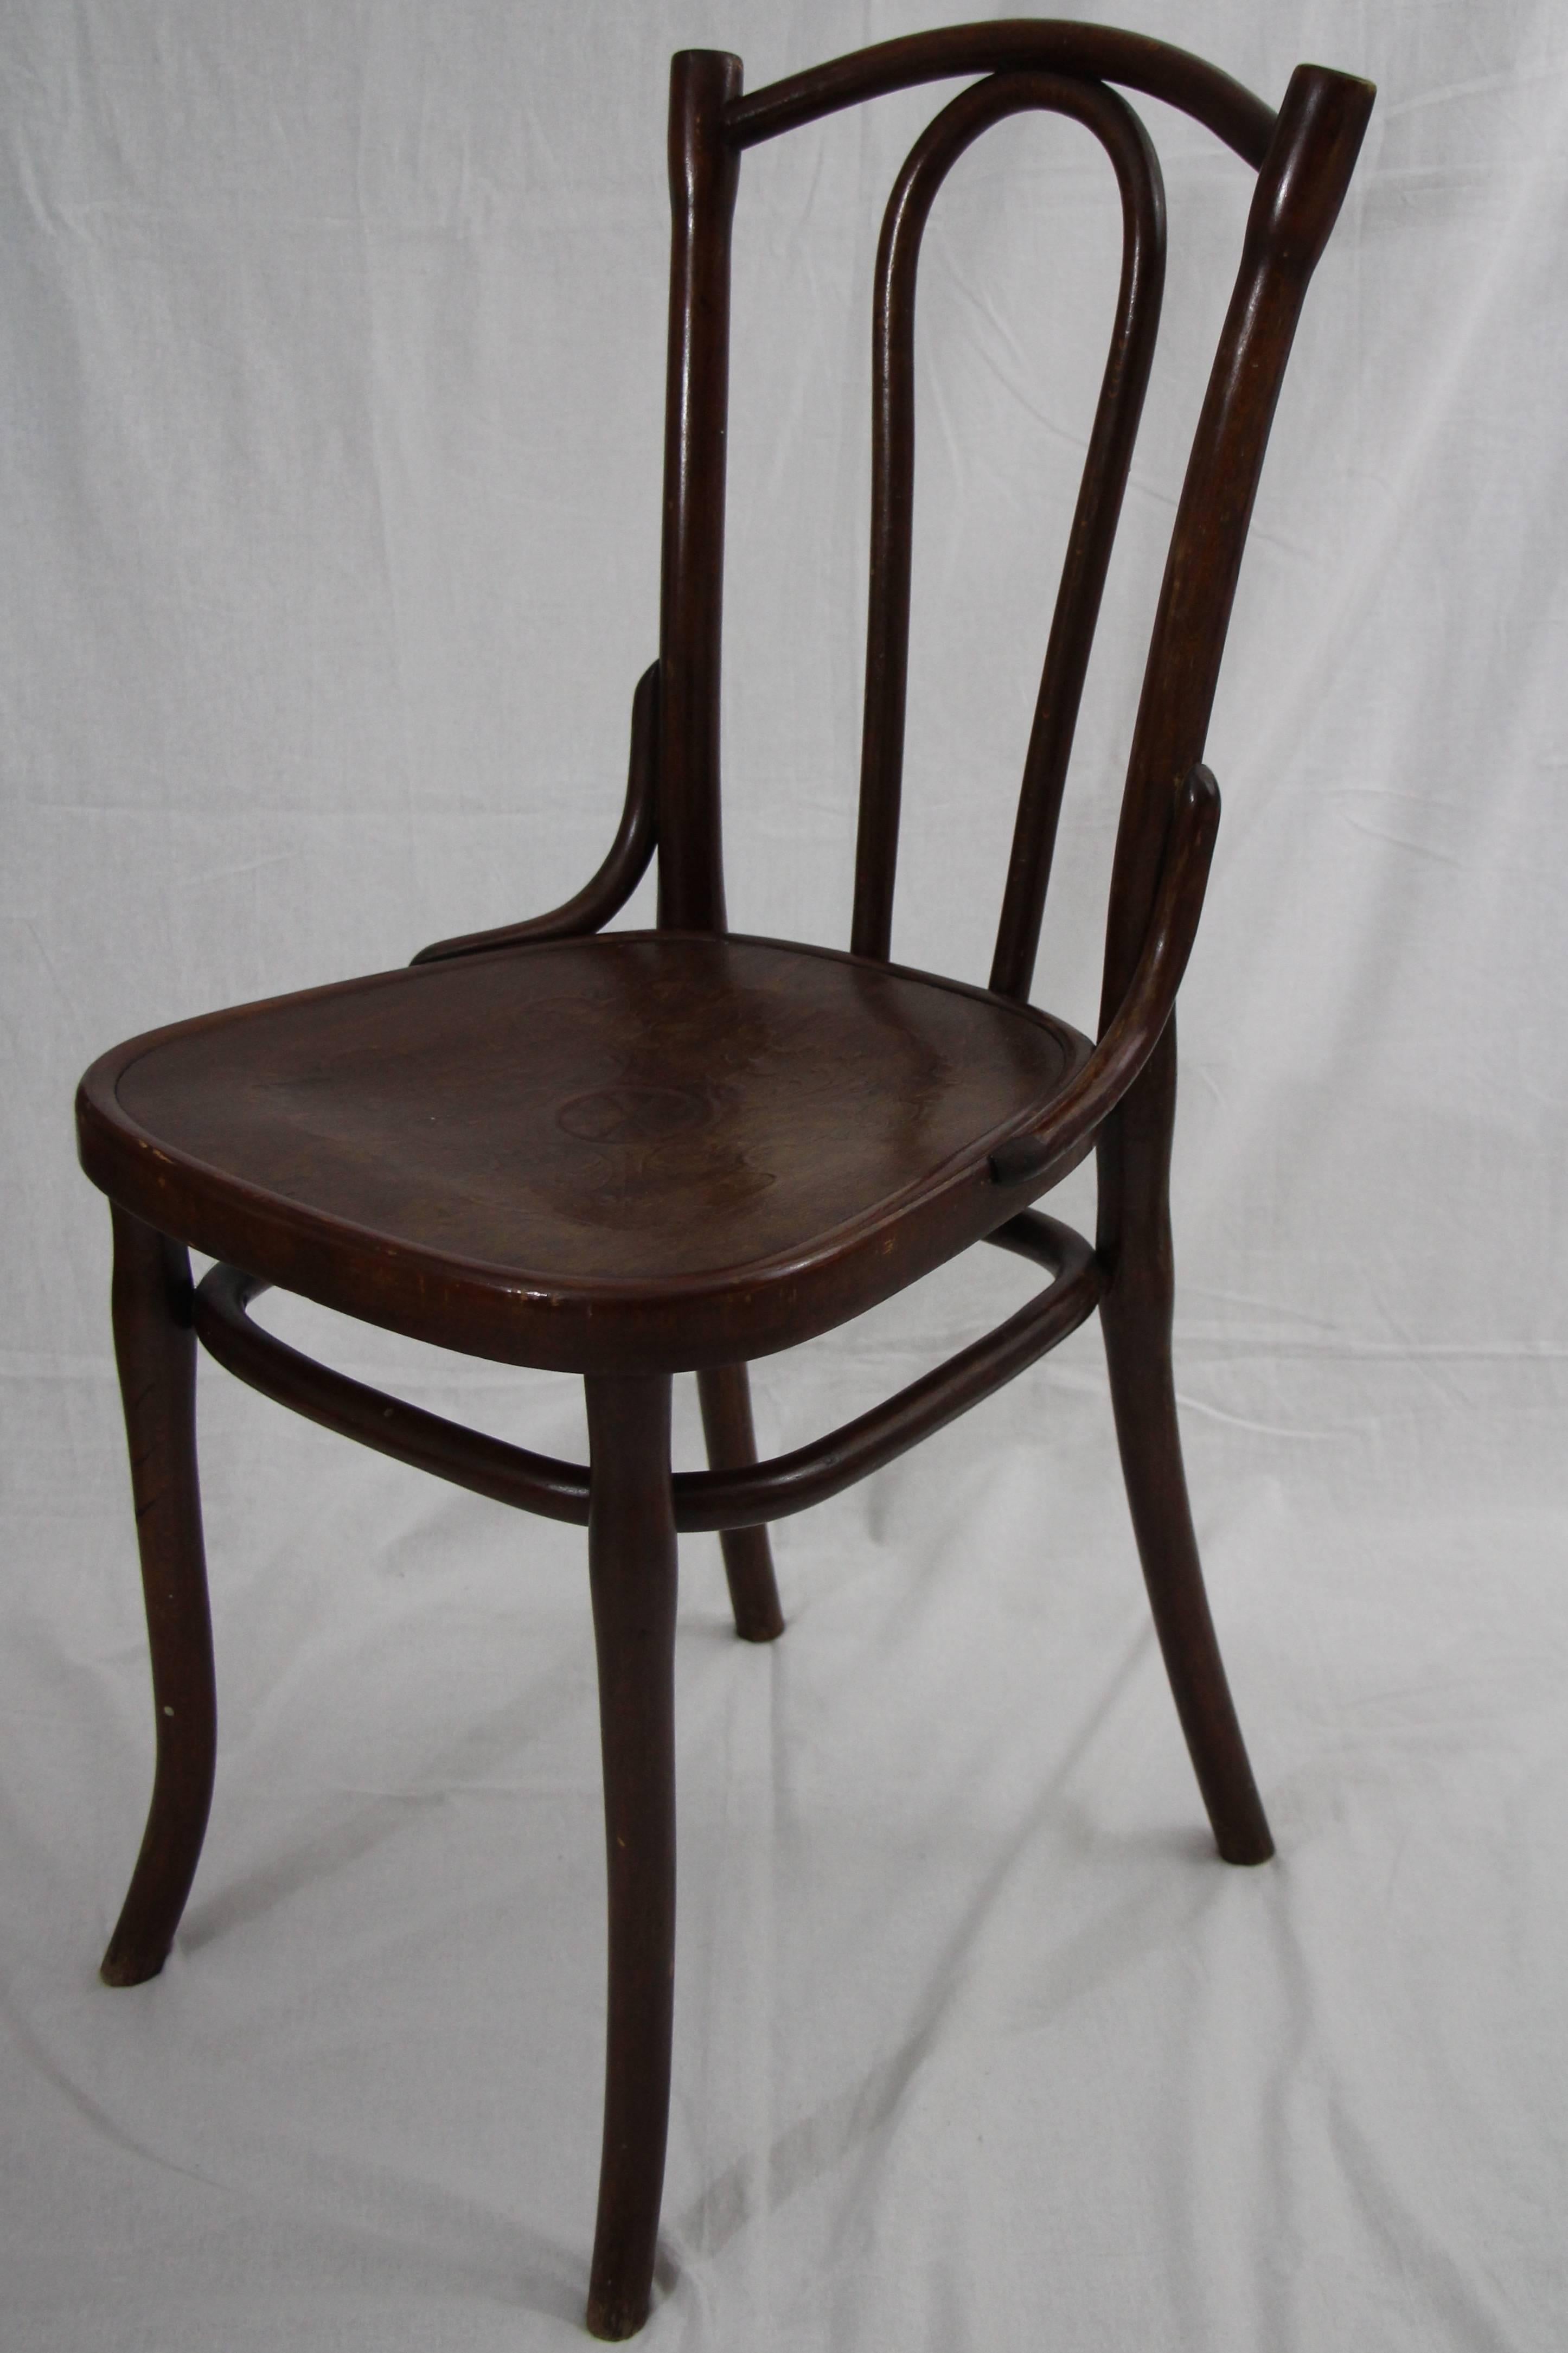 Set of four bentwood coffee house chairs with embossed seats. Produced by Gebrueder Thonet in Vienna, circa 1900. Old Thonet label on the underside.